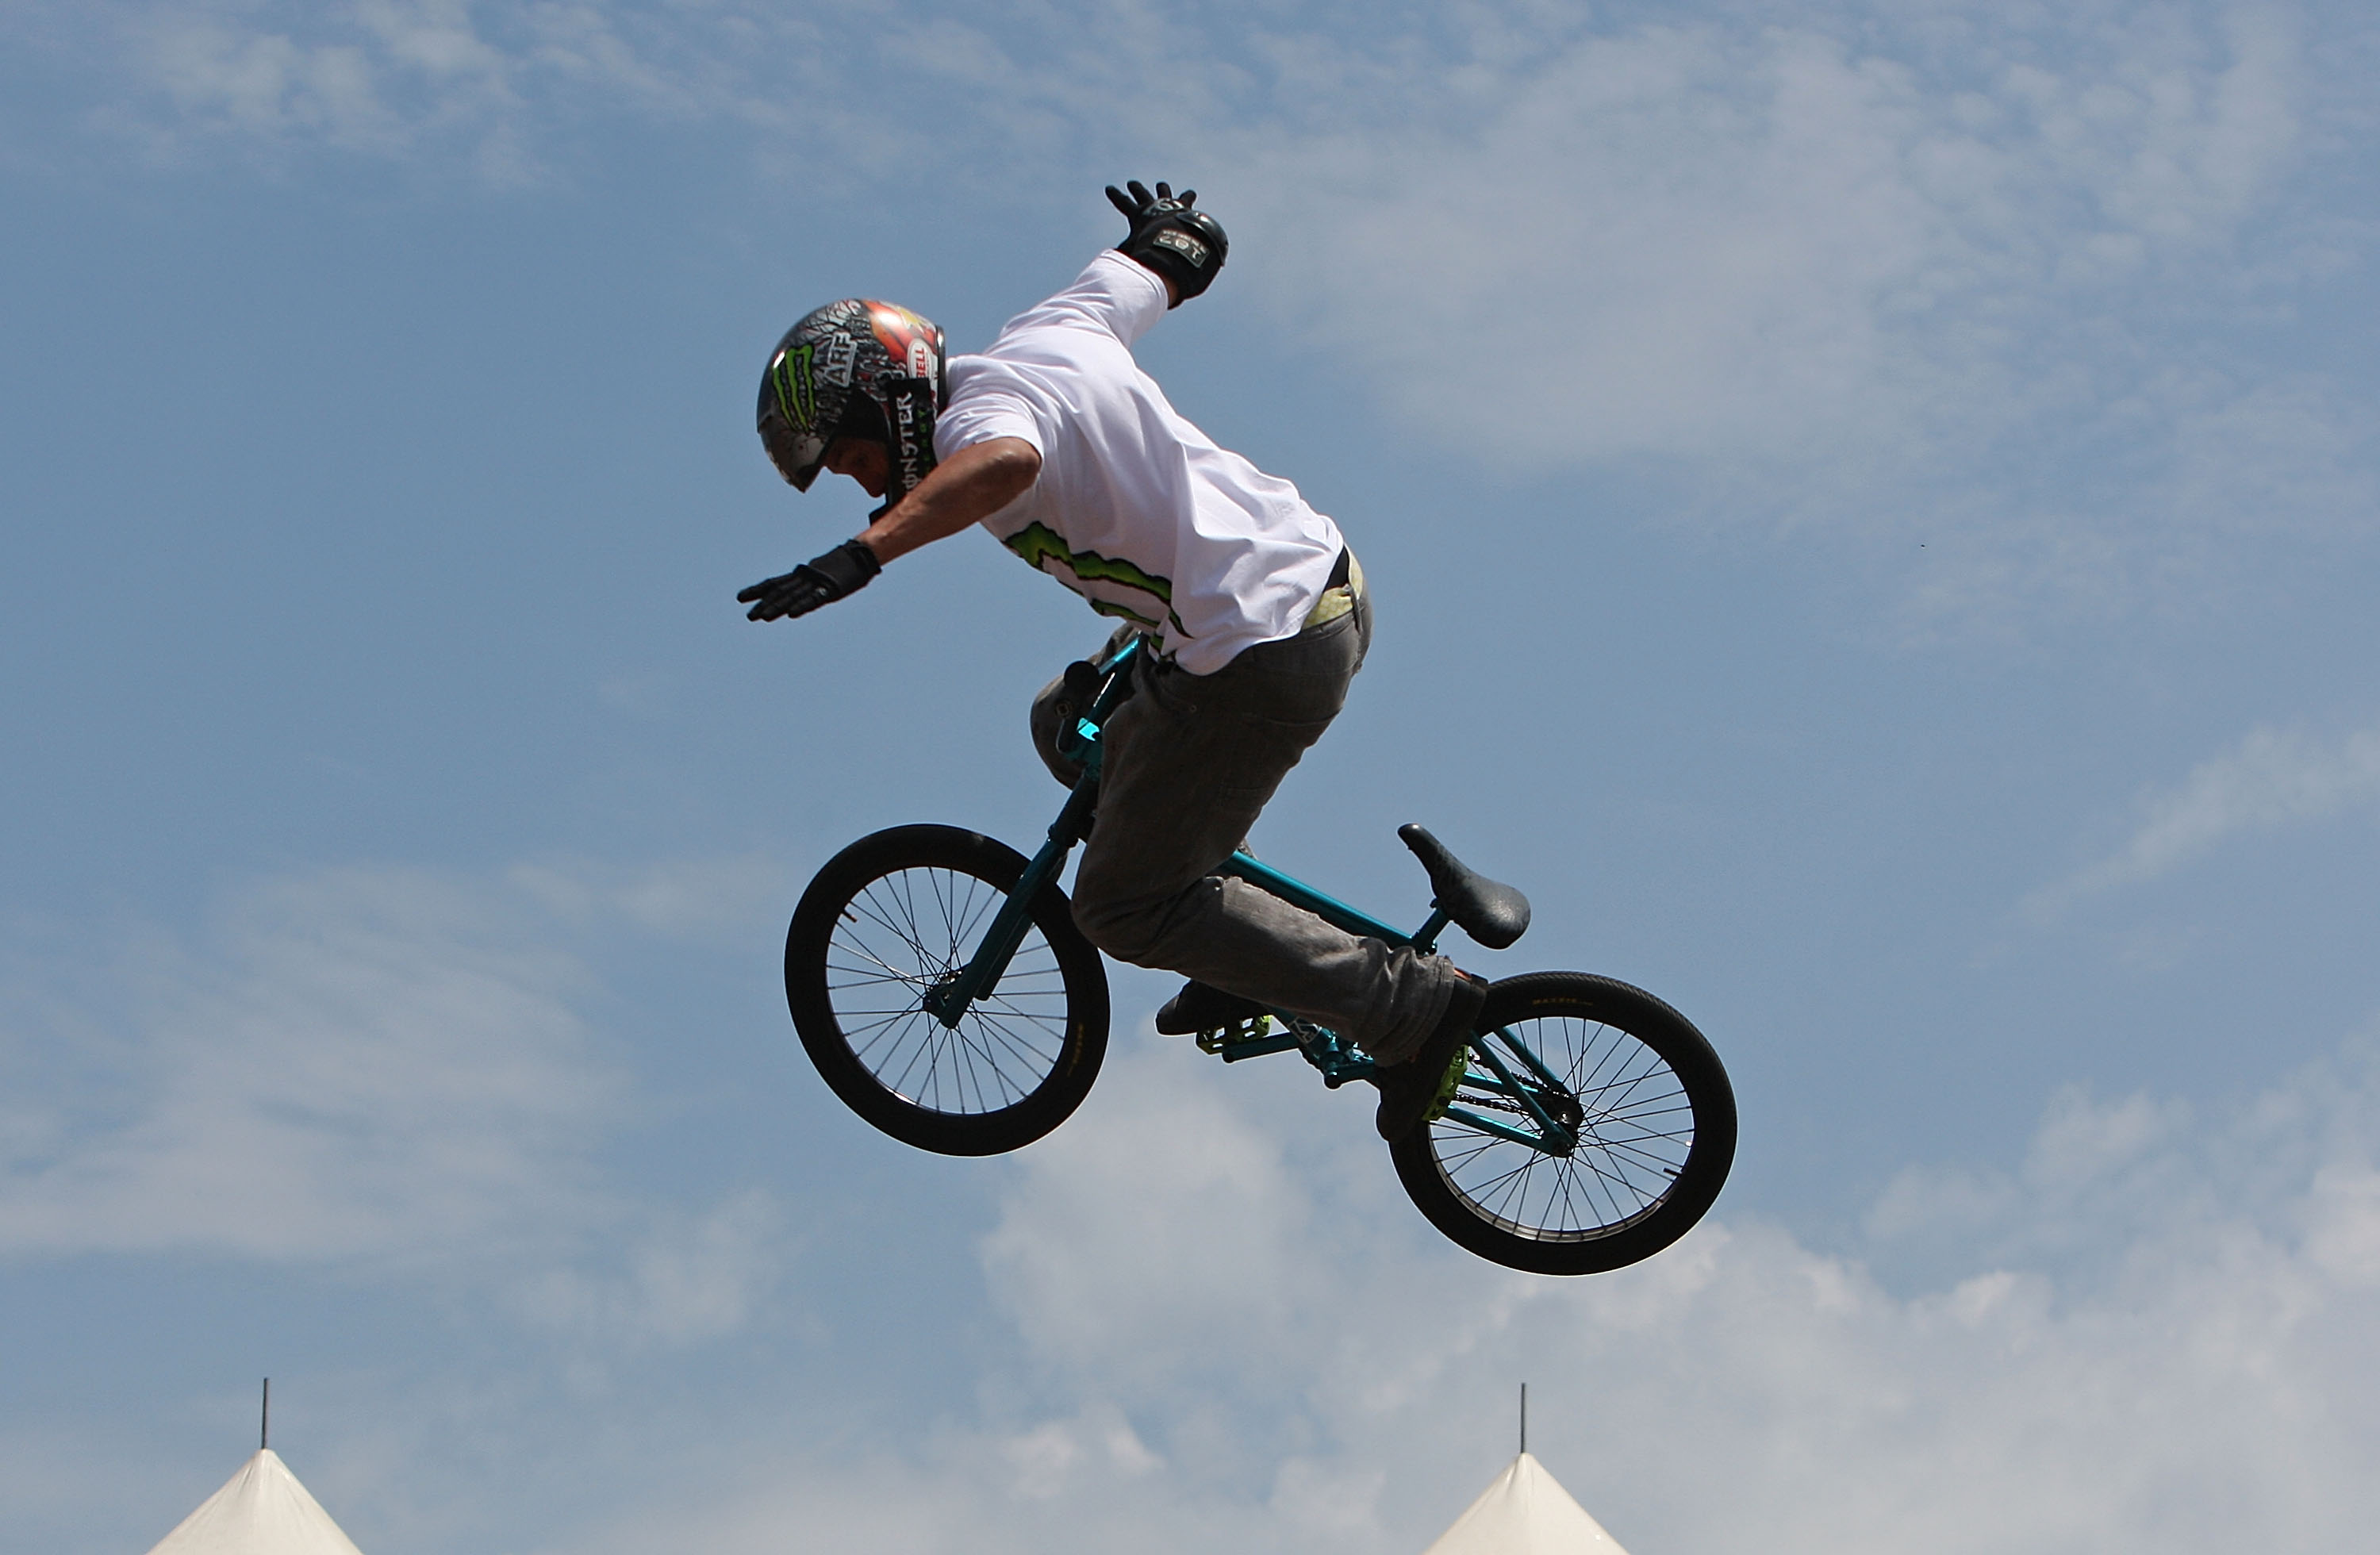 Dave Mirra performs on his way to first place during the BMX Park Final of the Nike 6.0 BMX Open on June 27, 2009 at Grant Park in Chicago, Illinois. (Jonathan Daniel/Getty Images)